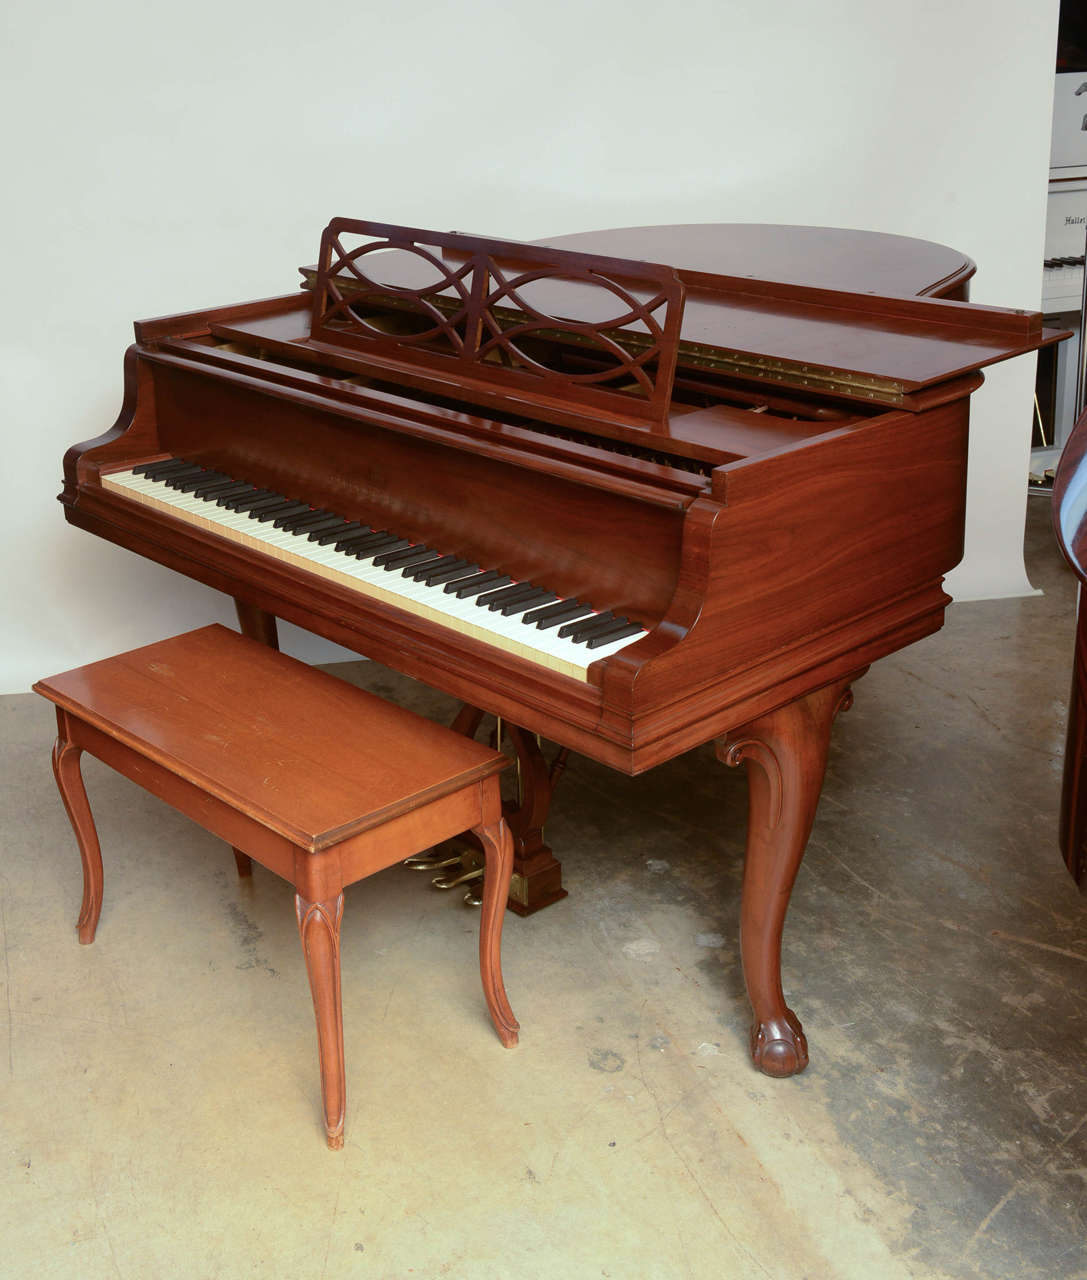 Steinway Grand Piano in excellent condition. Please contact us for details.